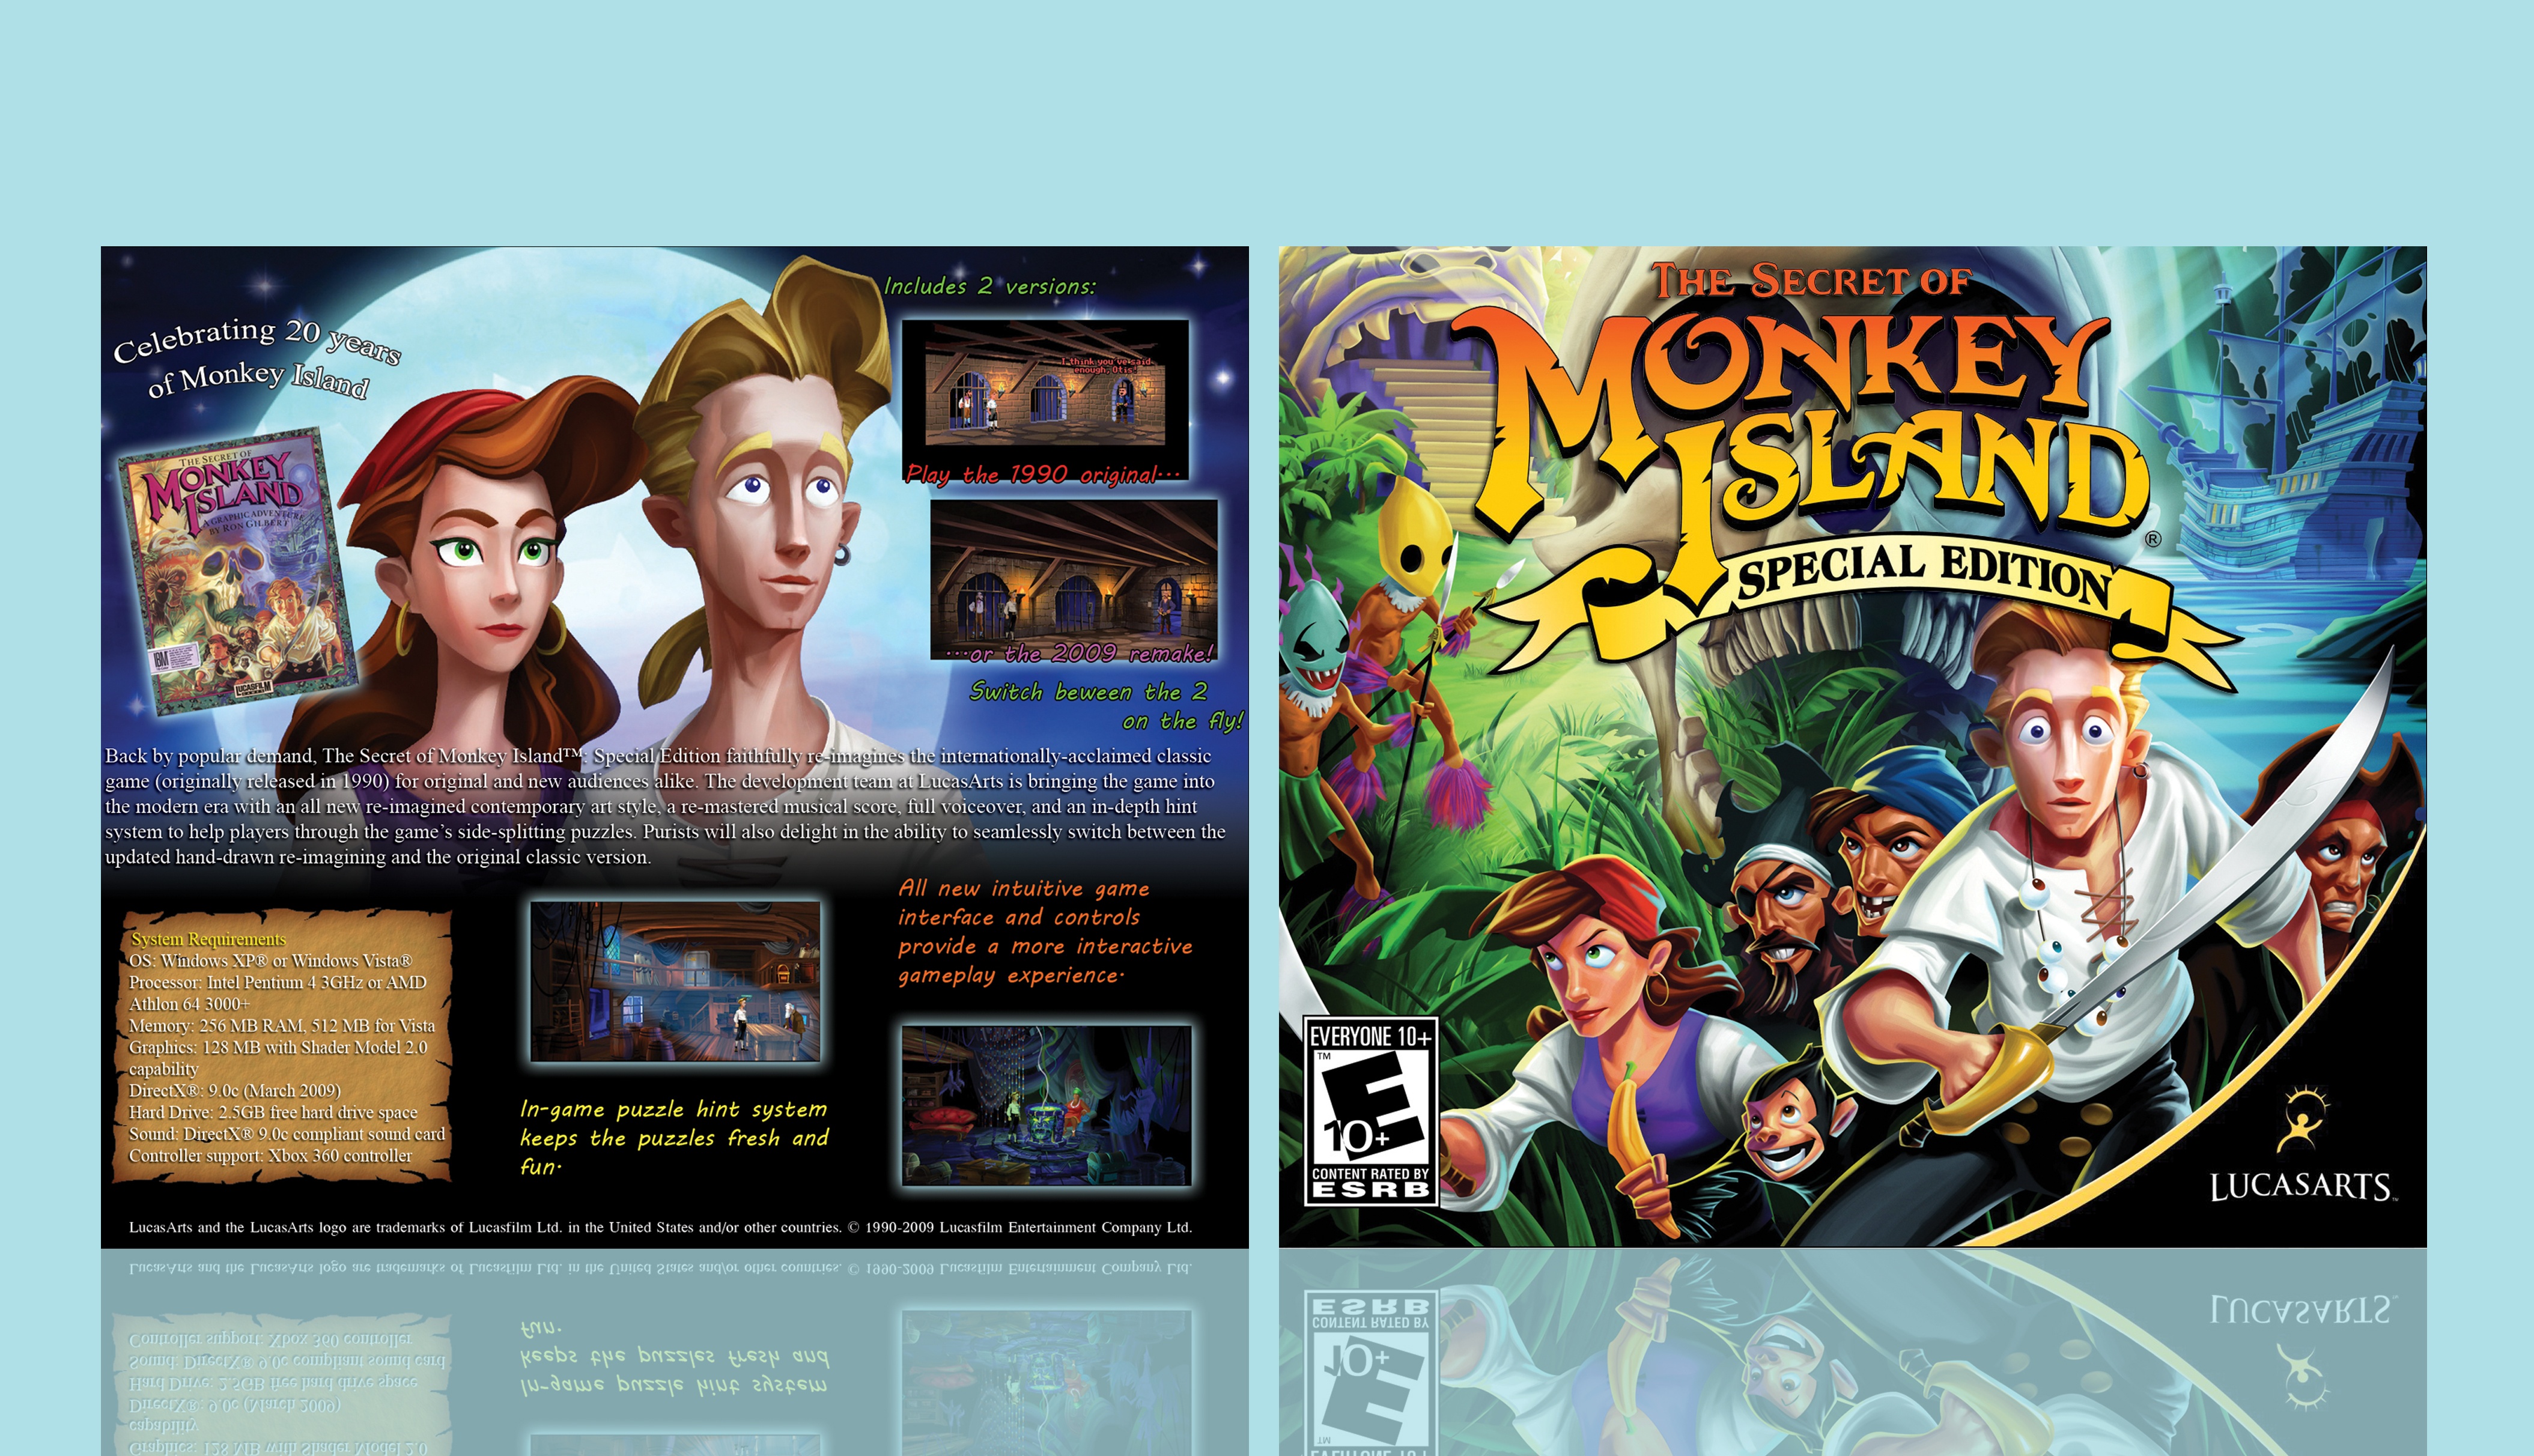 The secret of monkey island : special edition box cover